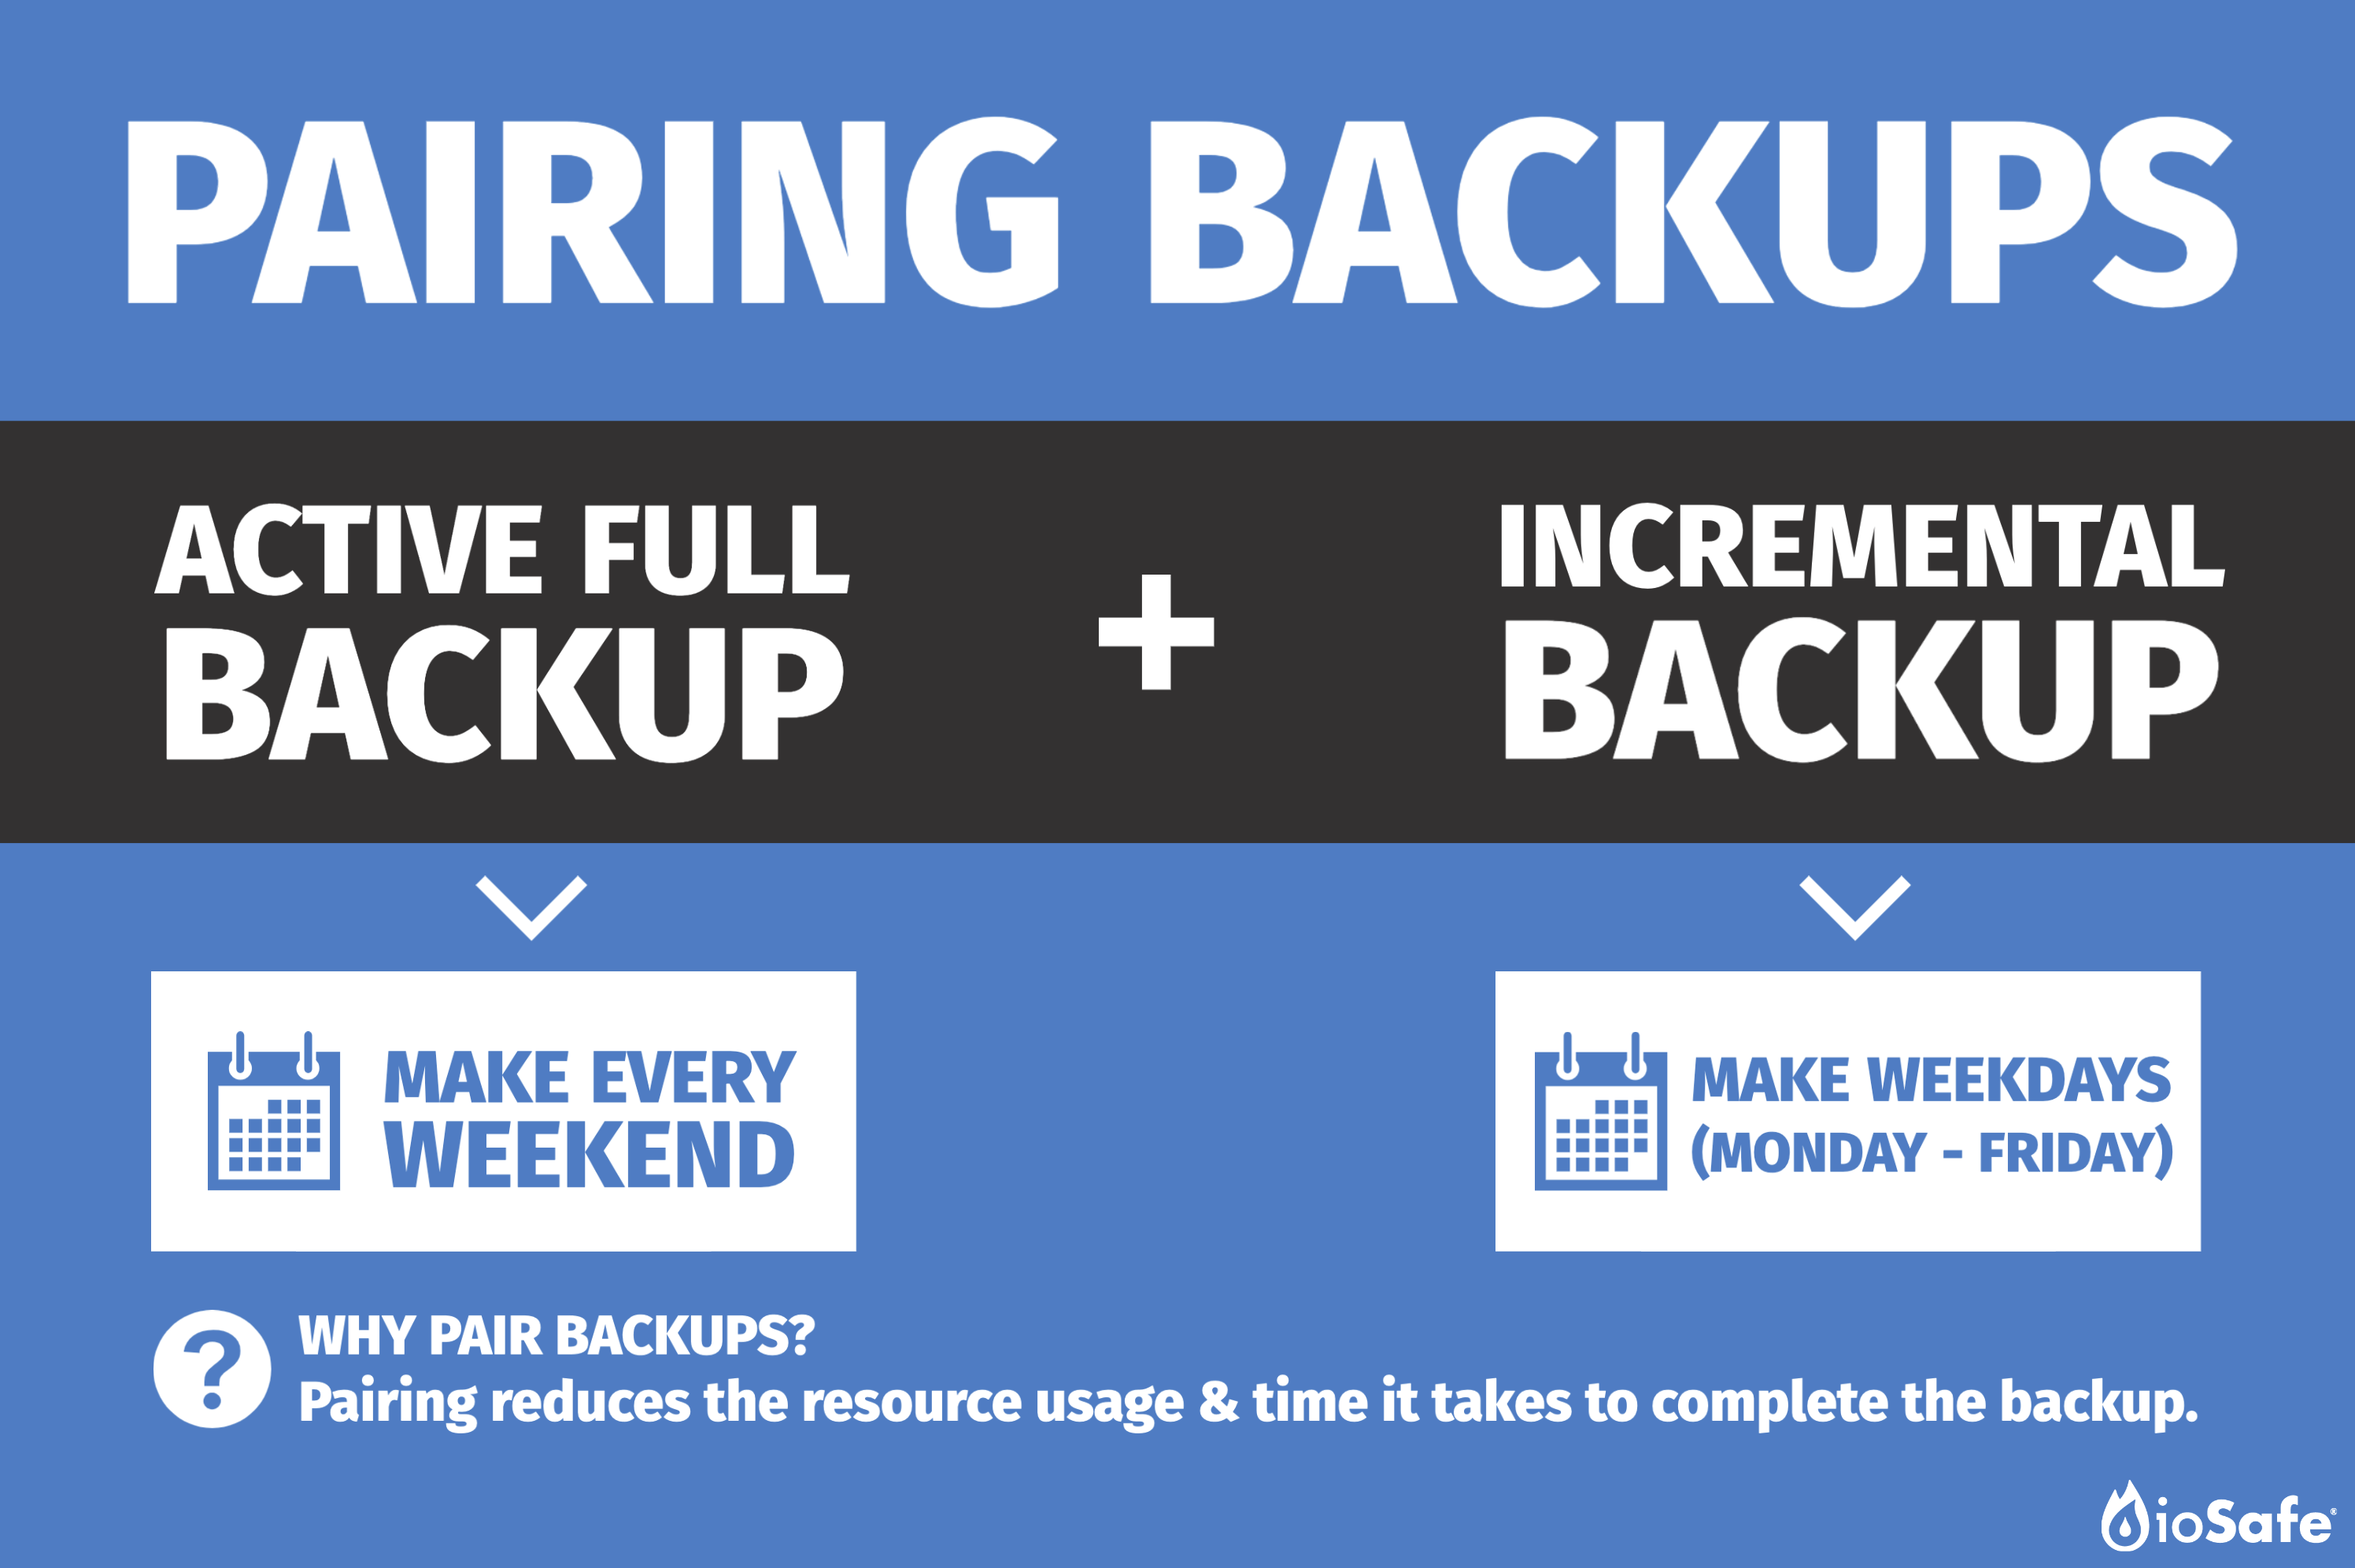 What is the difference between full backup and active full backup?